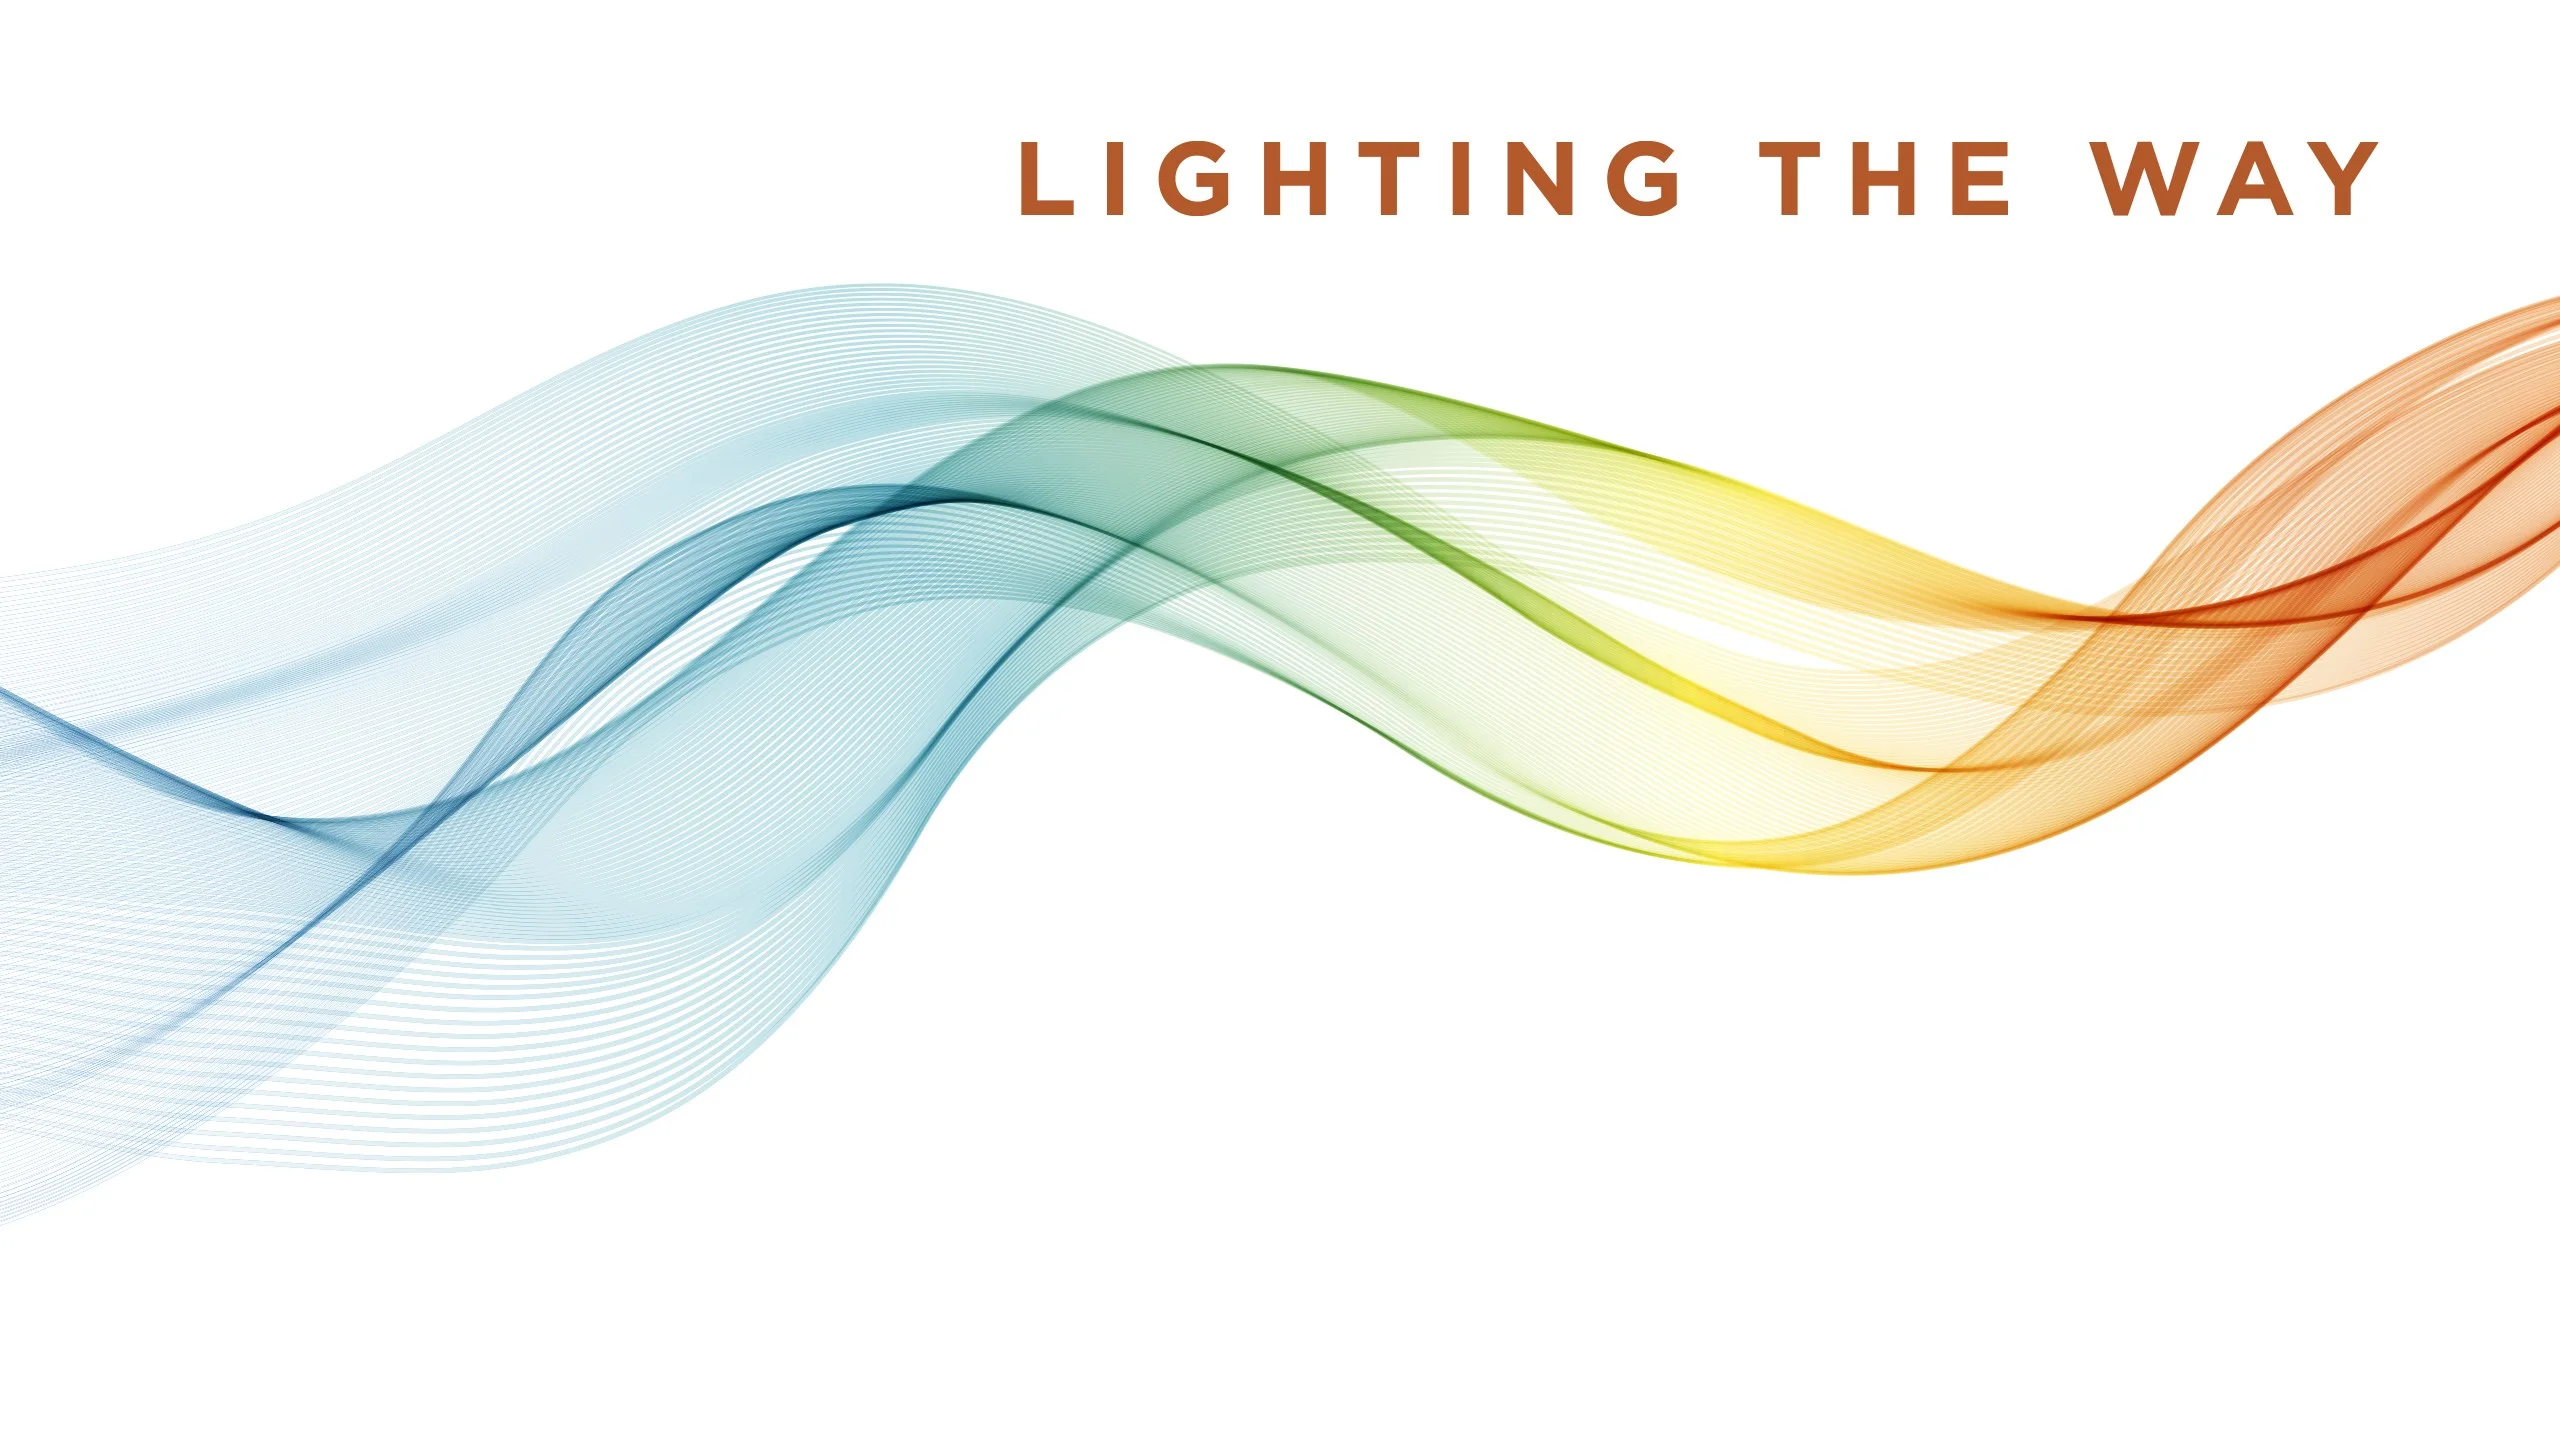 "Lighting the Way" logo for the Inauguration of Tufts 14th President